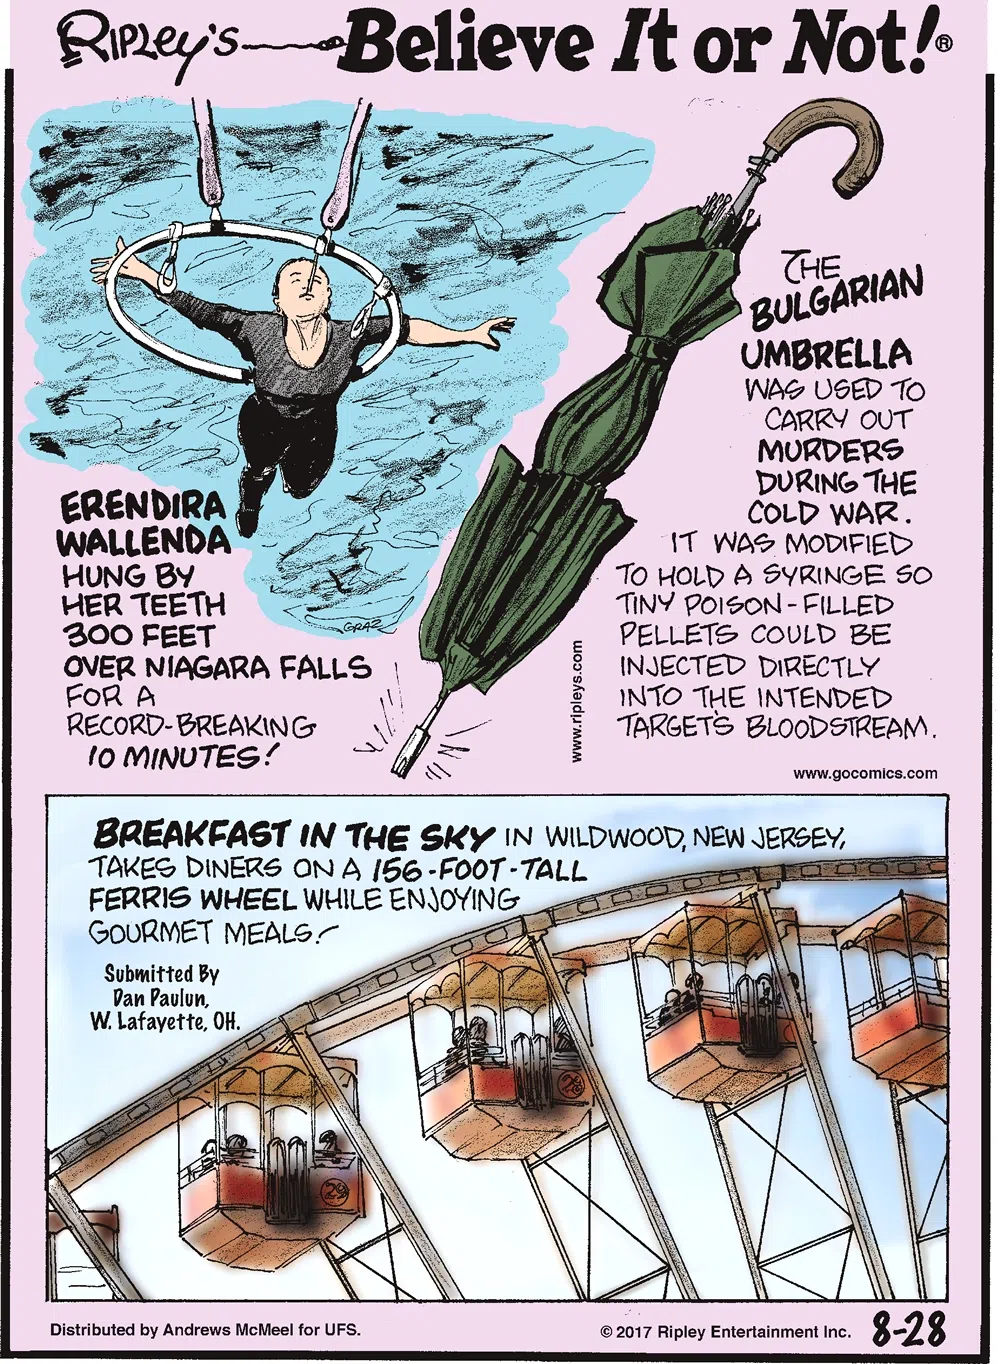 Erendira Wallenda hung by her teeth 300 feet over Niagara Falls for a record-breaking 10 minutes!-------------------- The Bulgarian Umbrella was used to carry out murders during the Cold War. It was modified to hold a syringe so tiny poison-filled pellets could be injected directly into the intended target's bloodstream.-------------------- Breakfast in the Sky in Wildwood, New Jersey, takes diners on a 156-foot-tall Ferris Wheel while enjoying gourmet meals! Submitted by Dan Paulun, W. Lafayette, OH.